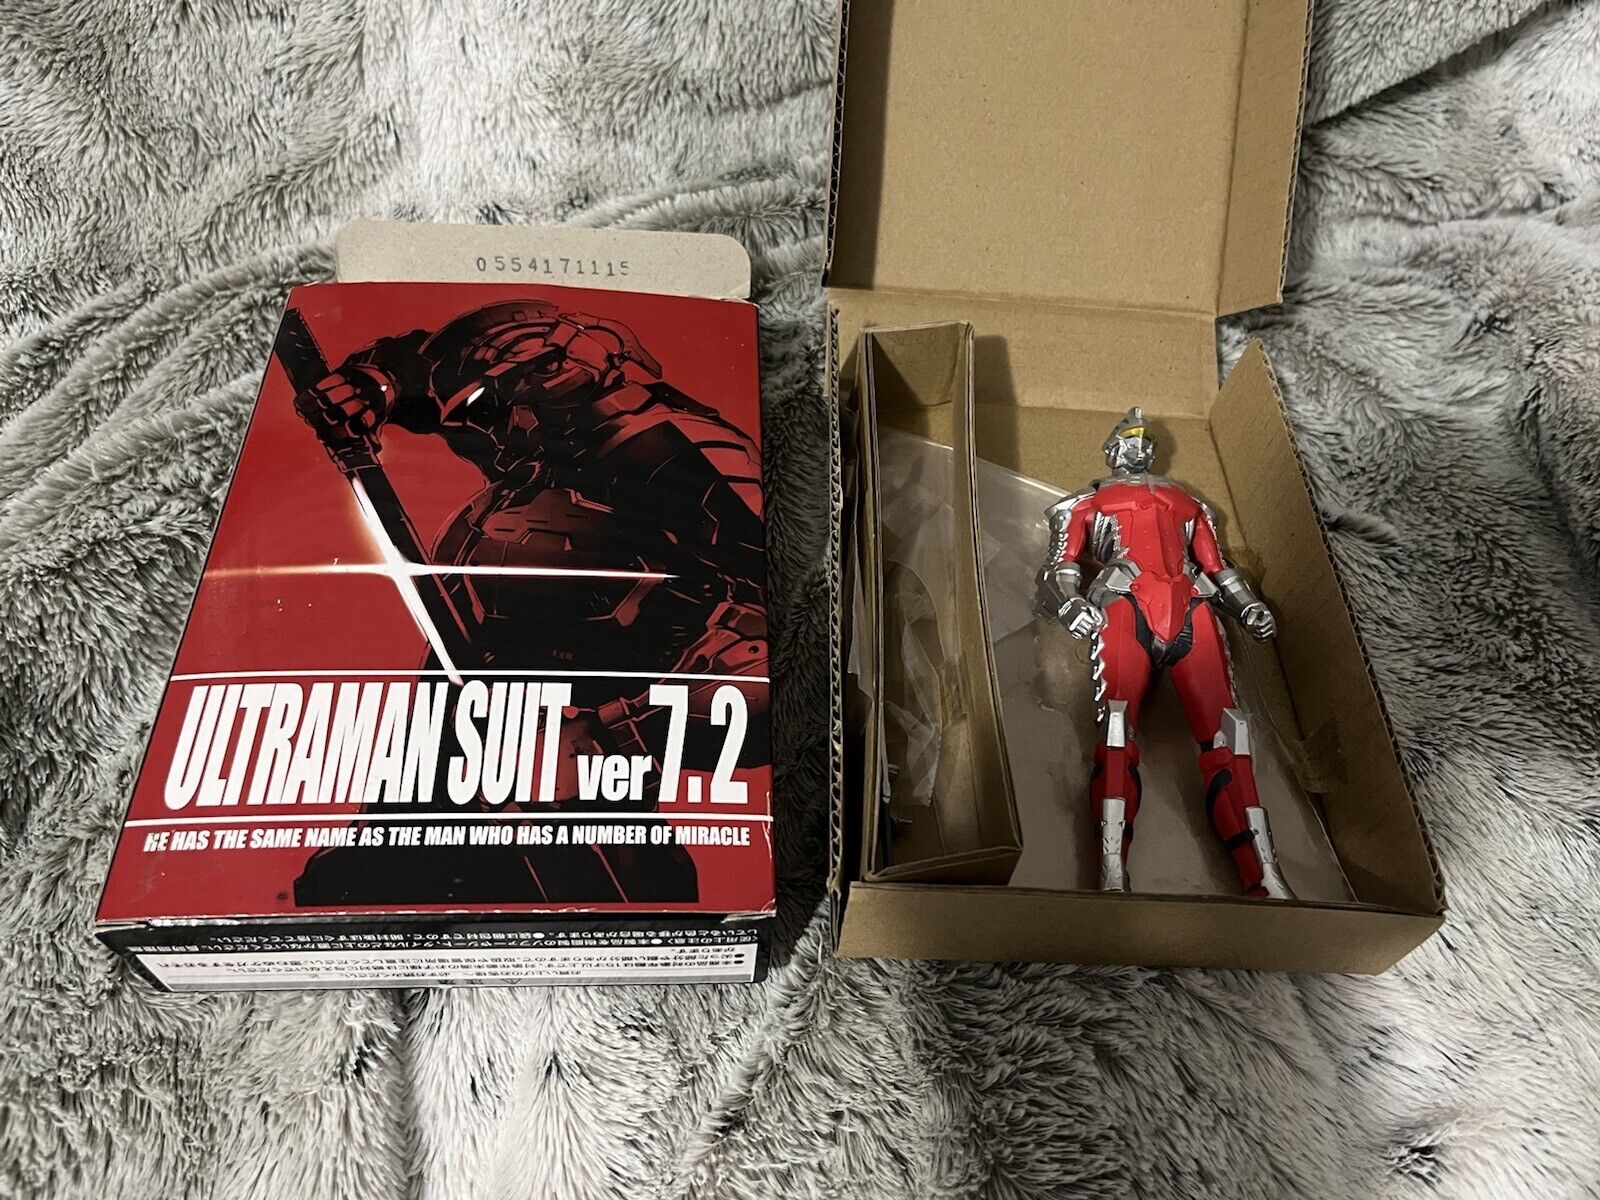 ULTRAMAN SUIT Ver 7.2 Manga Vol 7 Limited Edition Promotional Figure Ultraseven